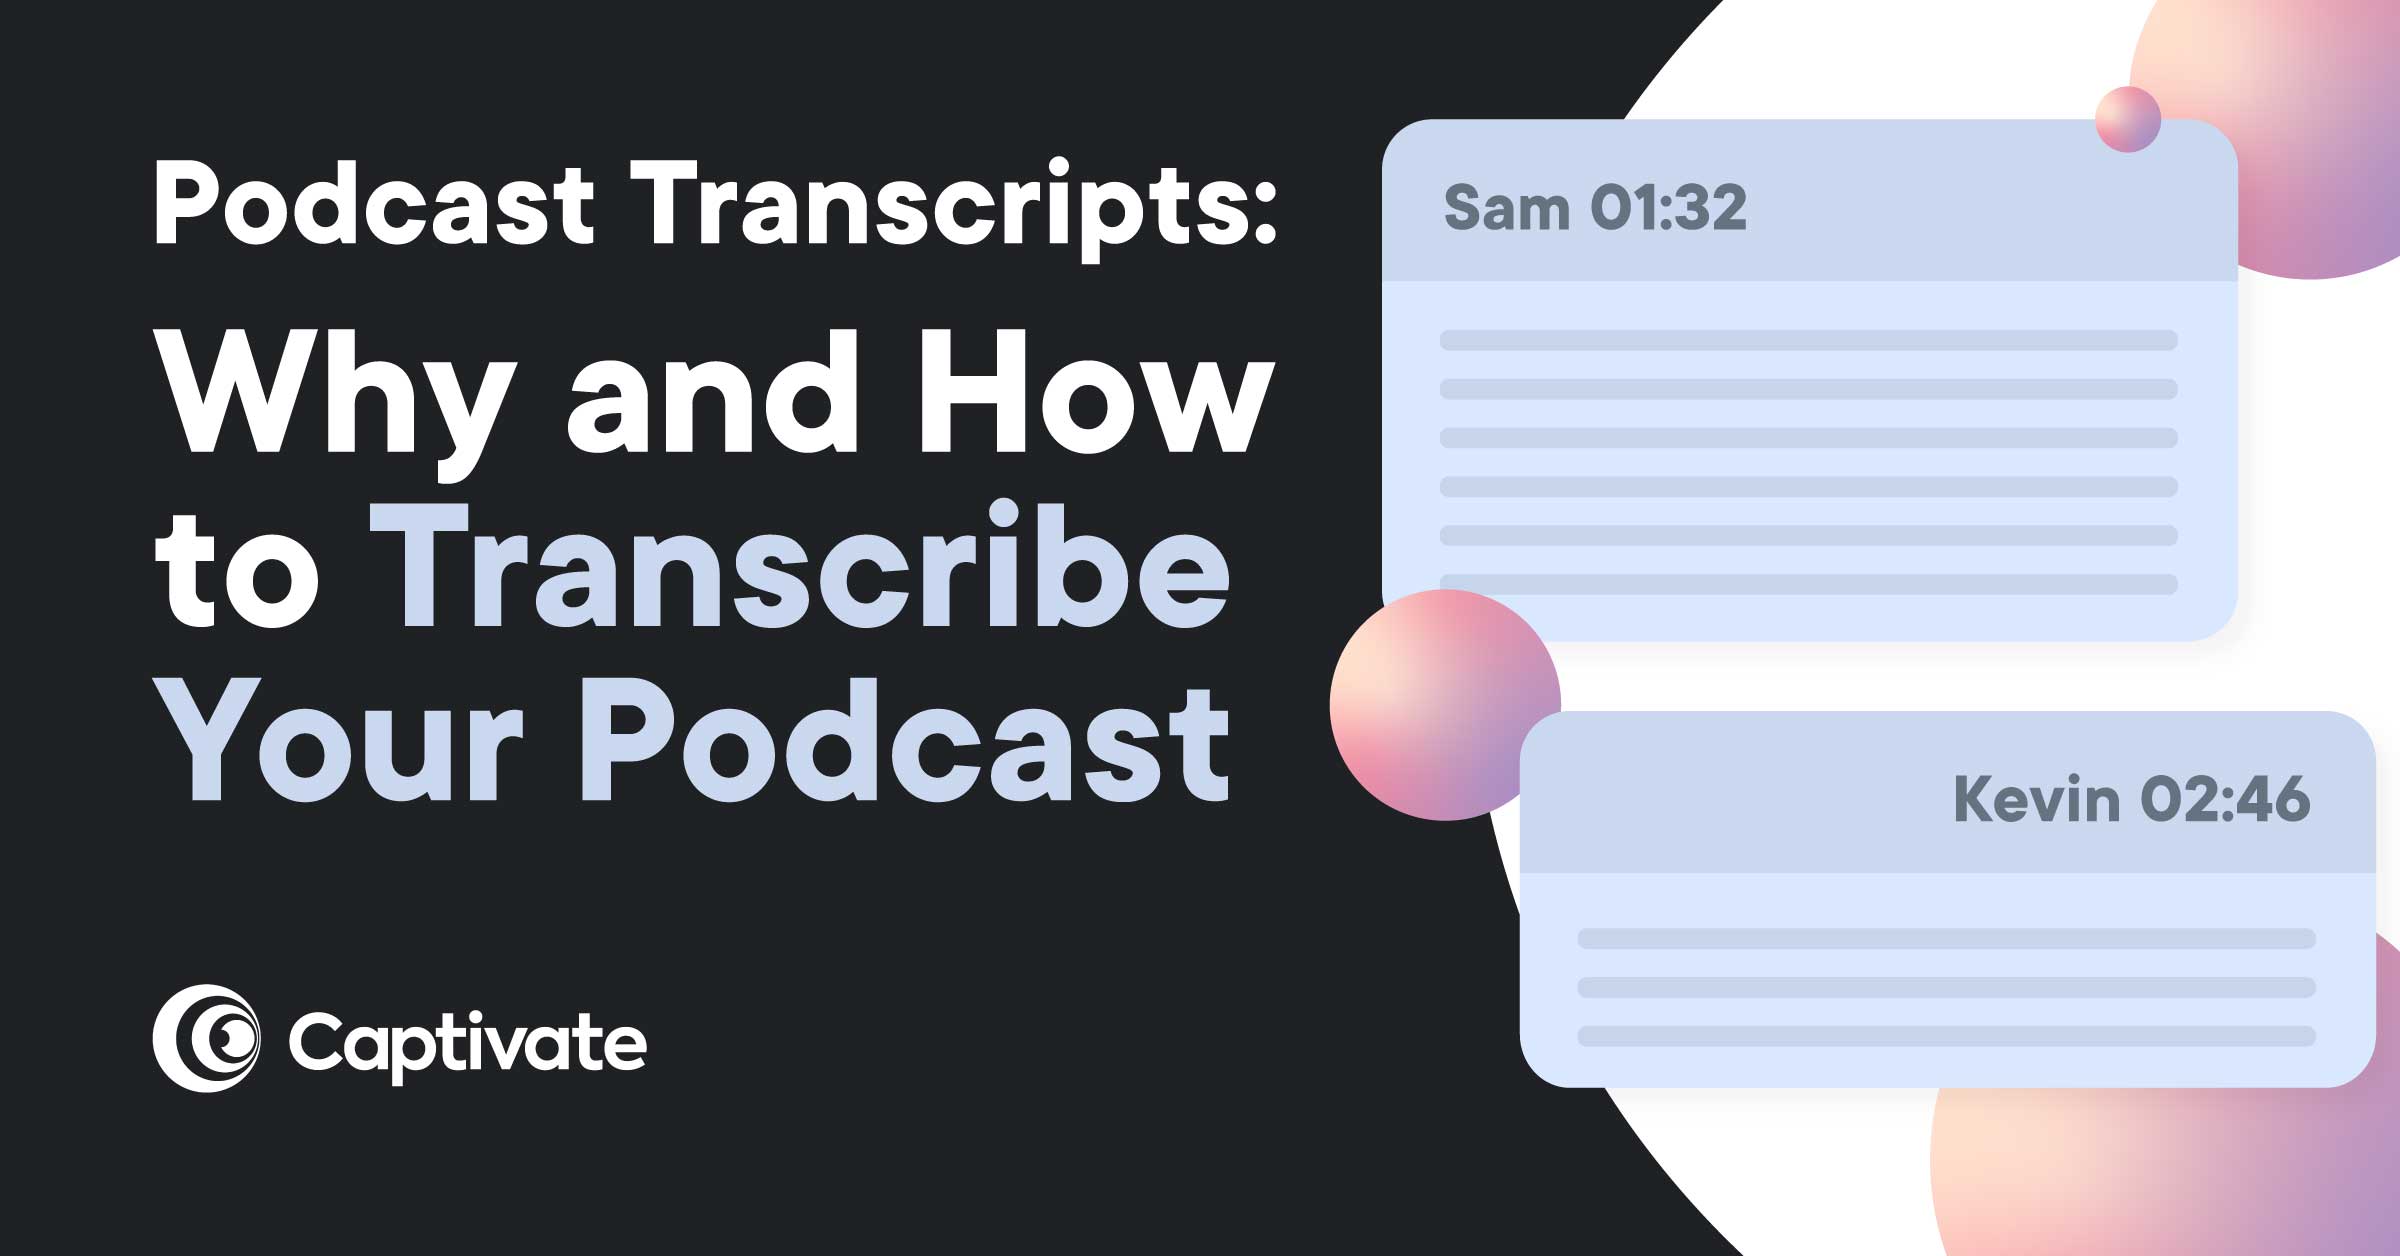 Captivate: Why and How to Transcribe Your Podcast